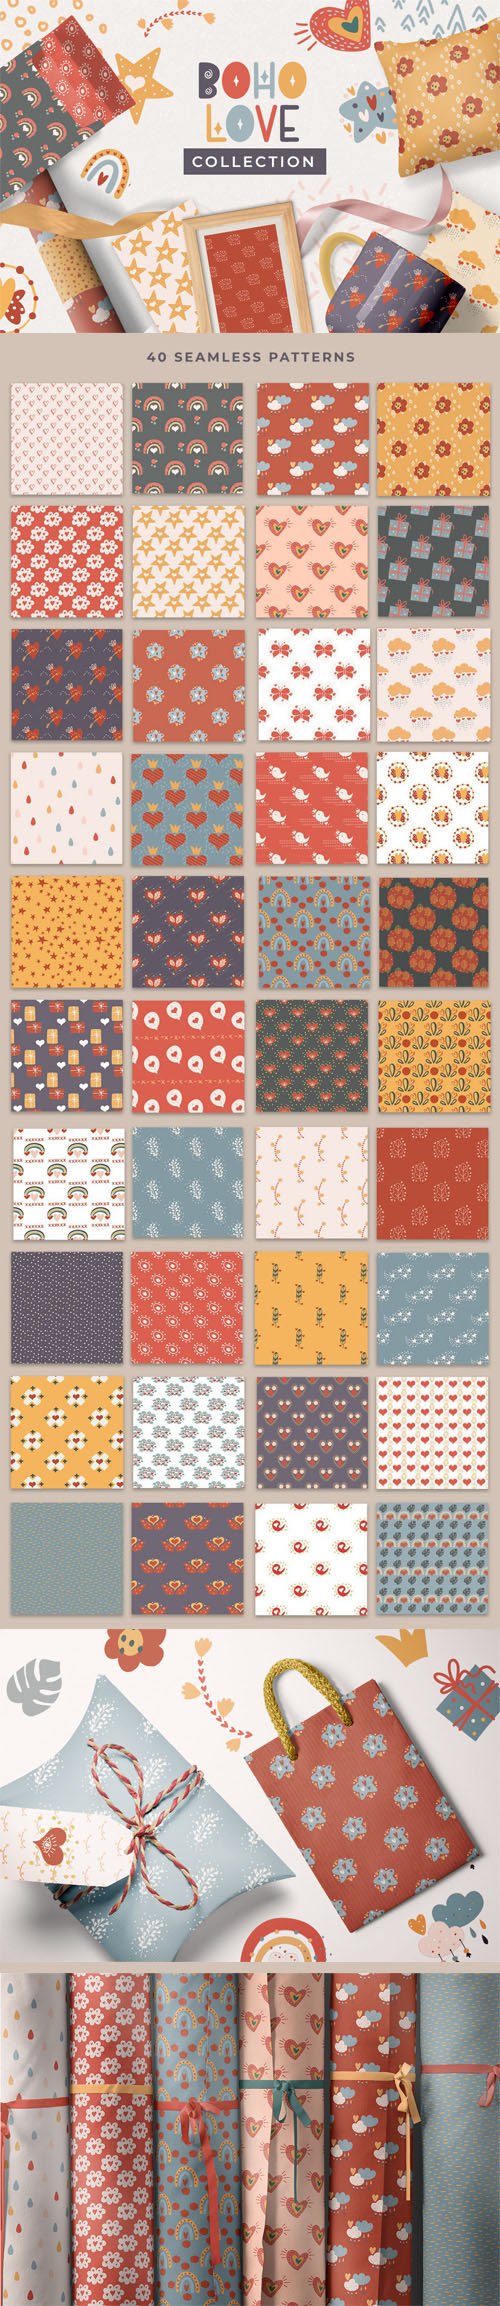 Boho Love Collection - 40 Seamless Patterns